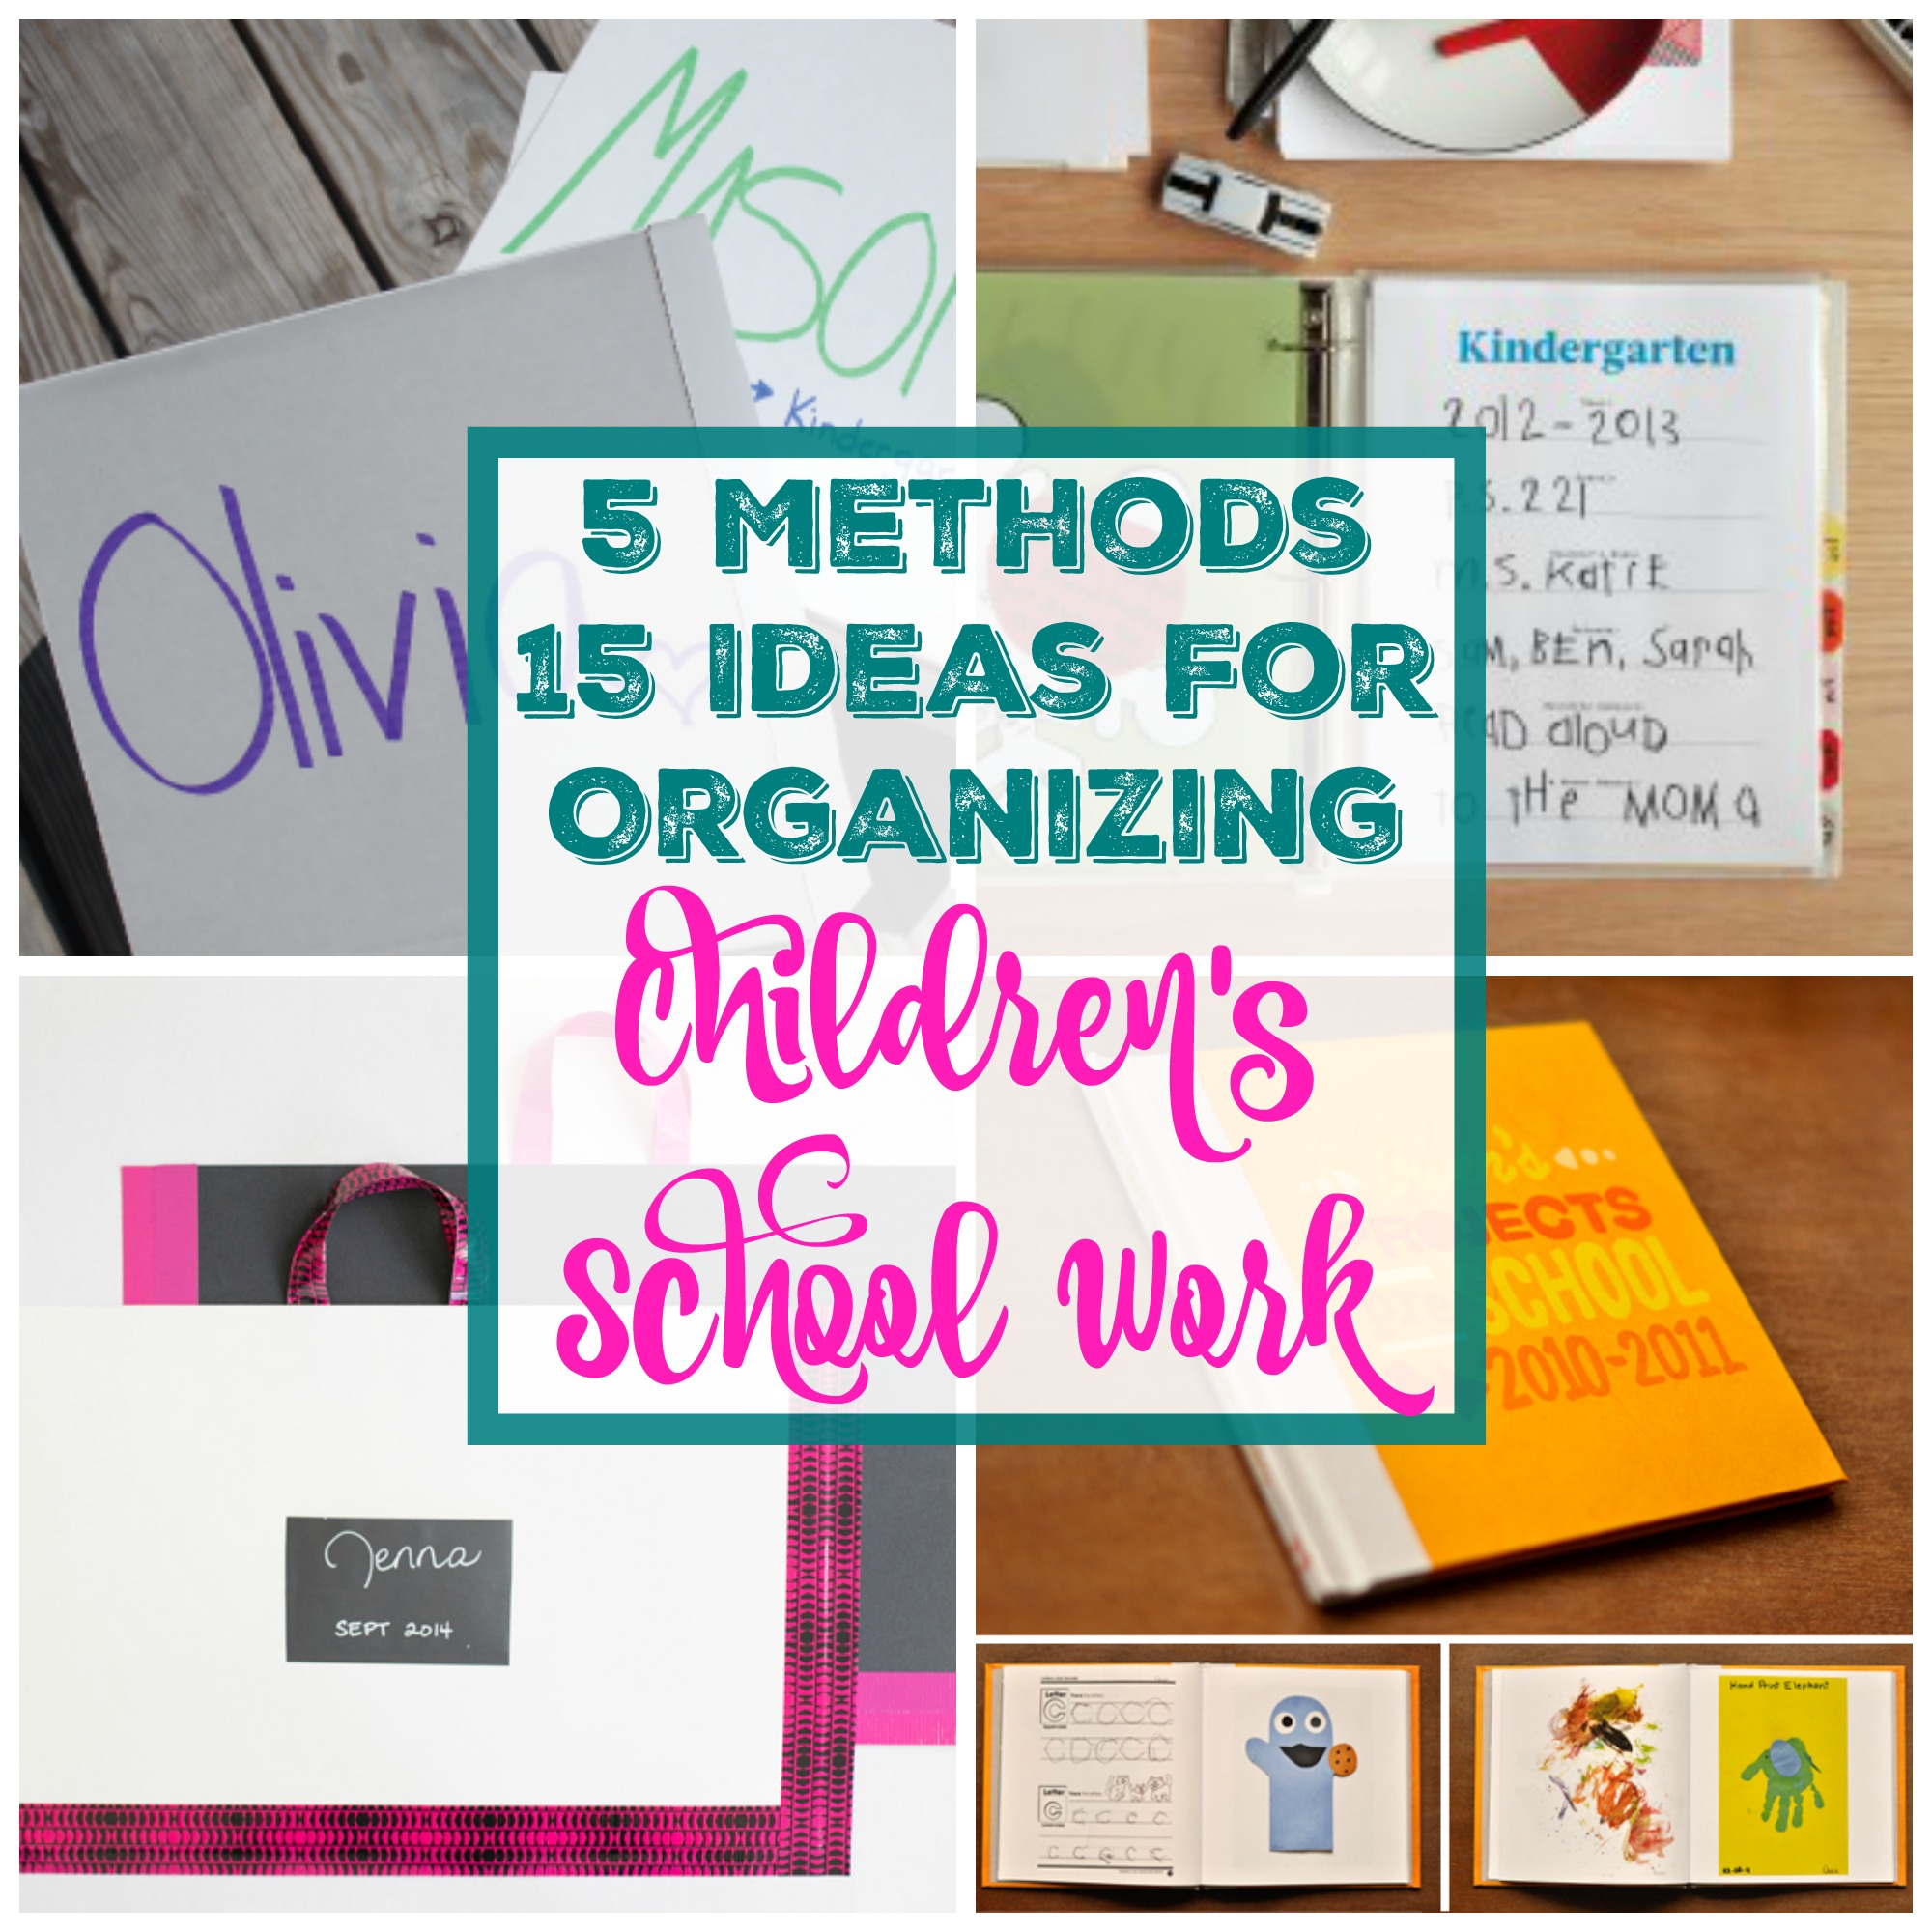 Homework Organizer Crafts Project for Parents and Kids to Declutter  Paperwork - Kids Crafts & Activities - Kids Crafts & Activities